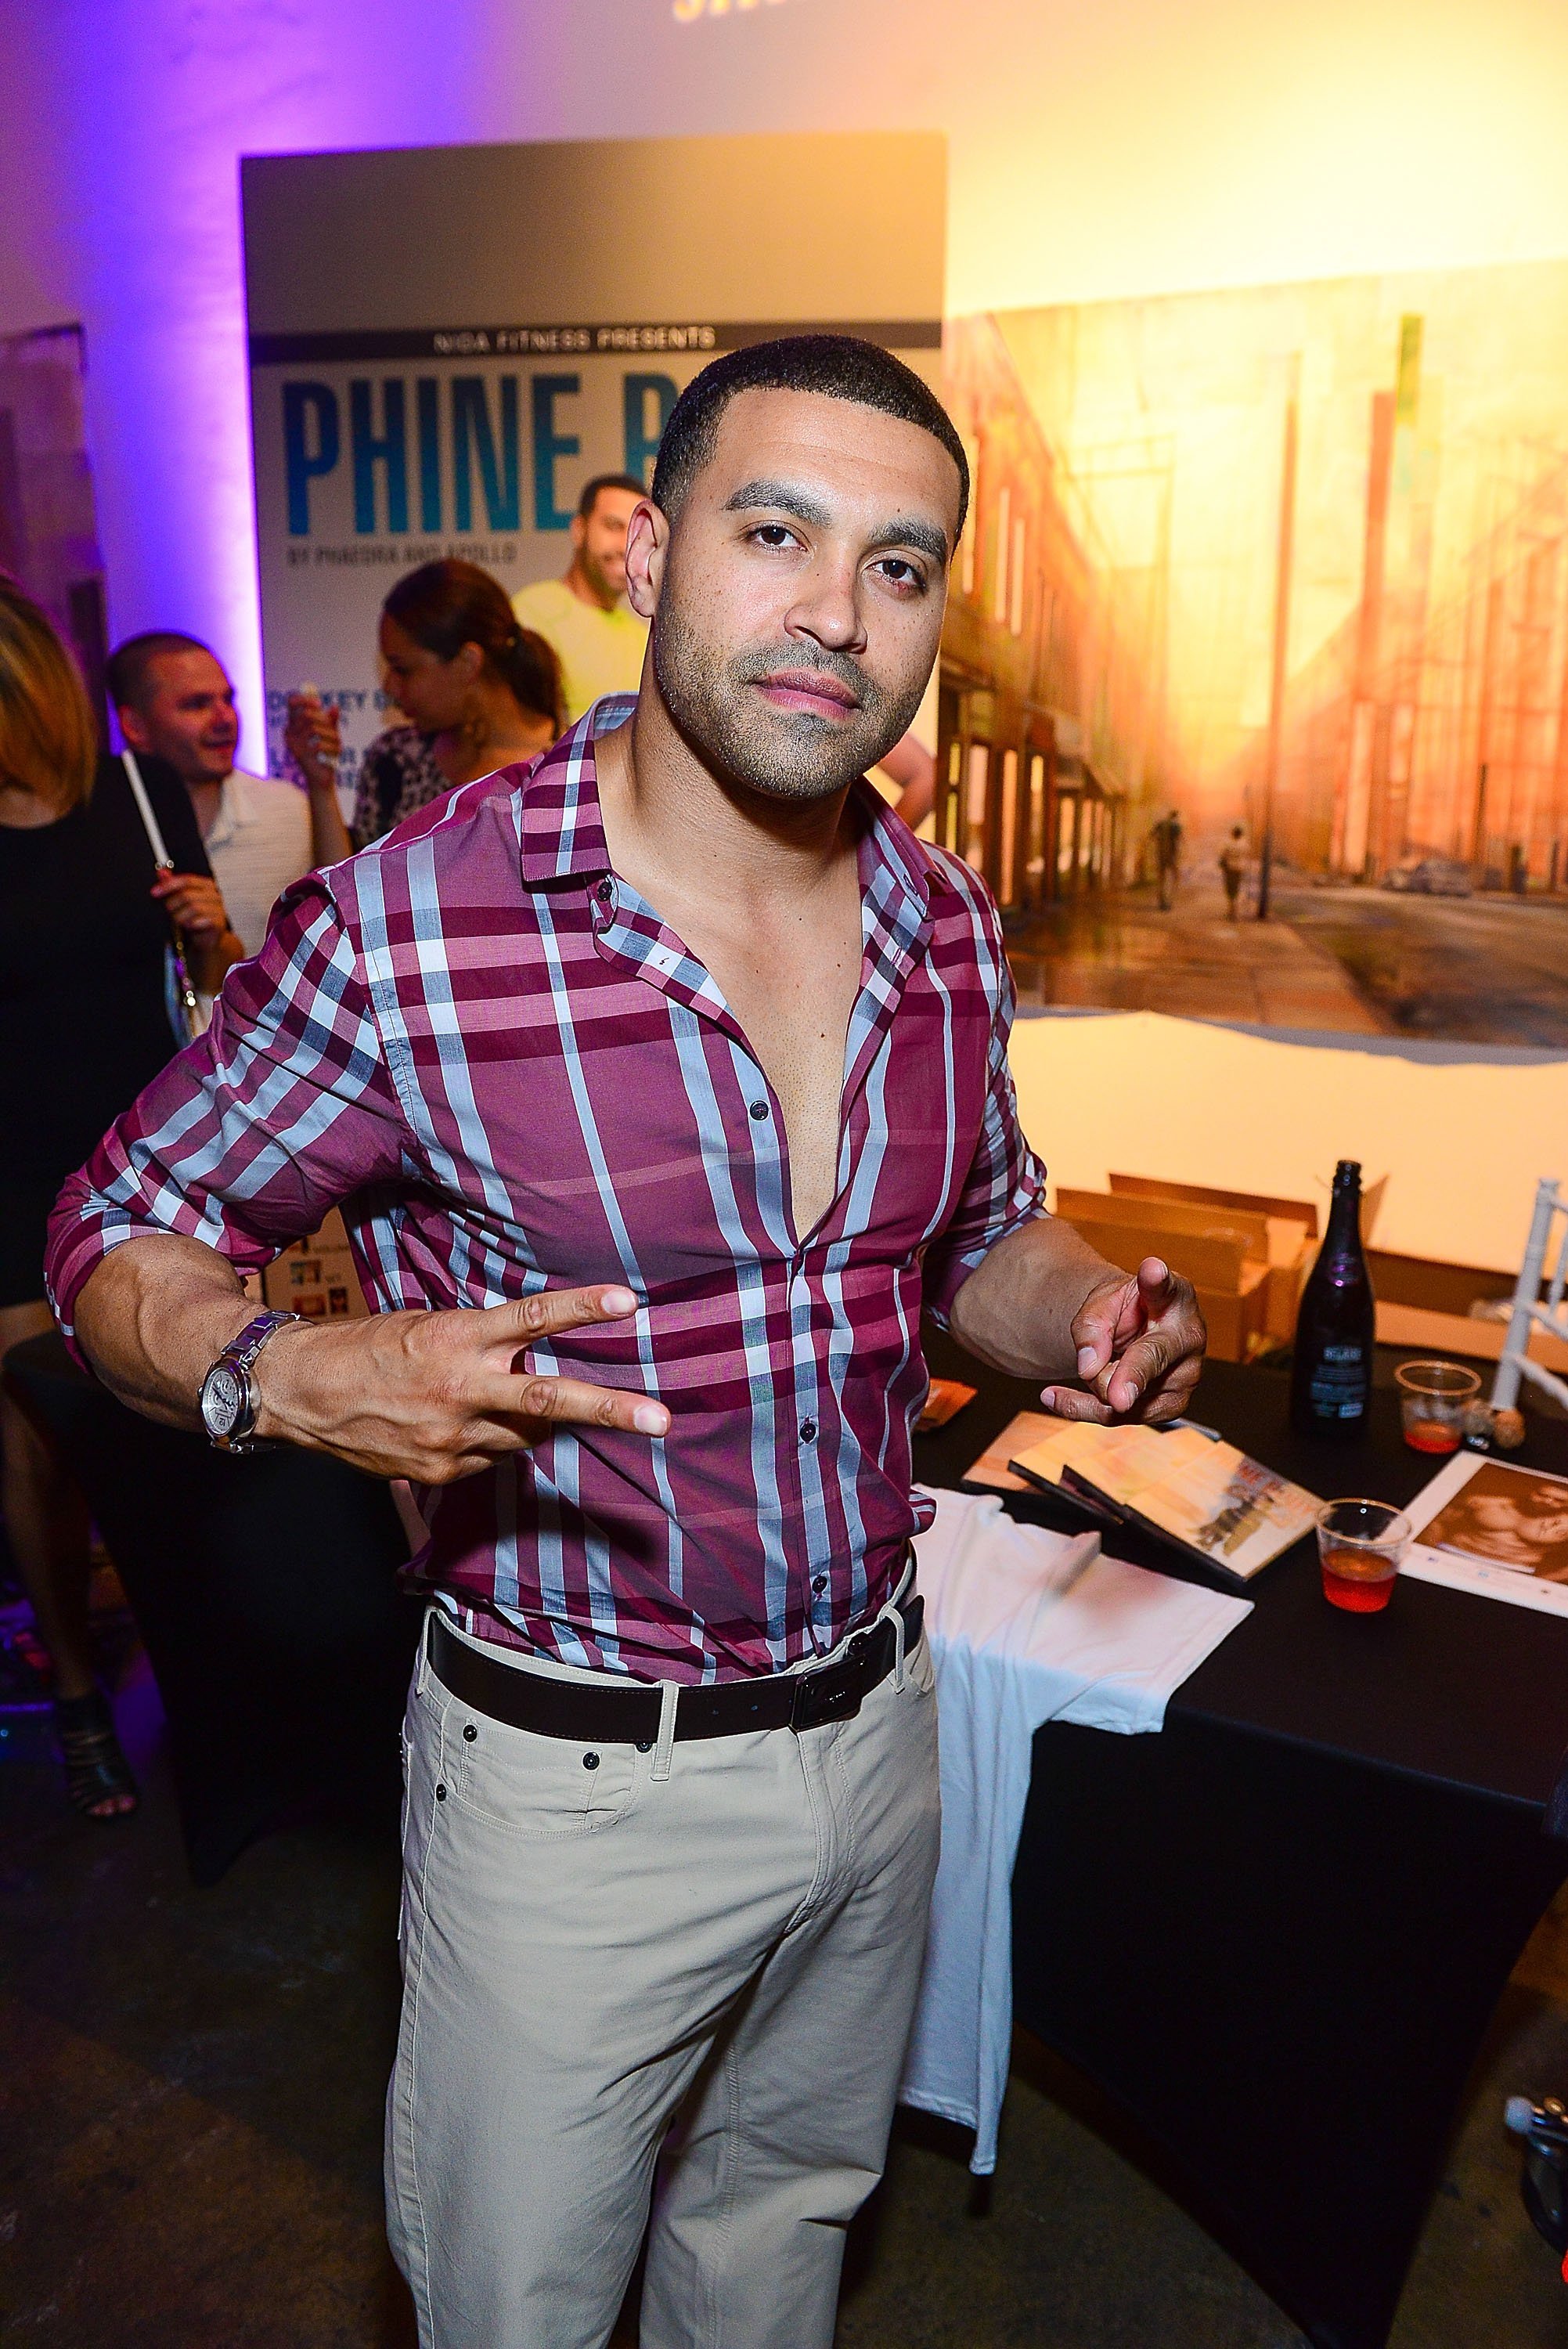 Apollo Nida during his pre-prison days back in 2014. | Photo: Getty Images